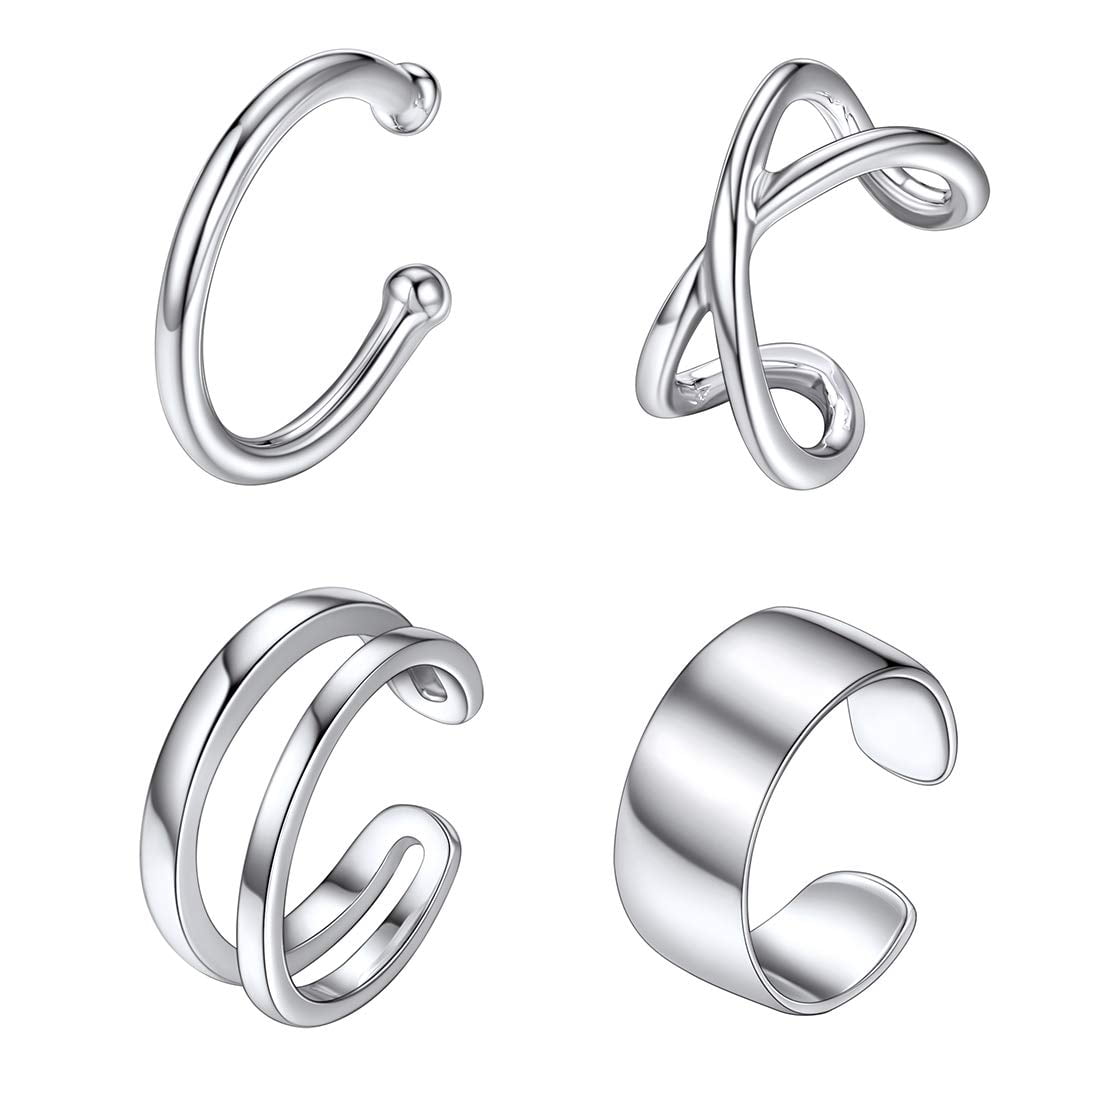 ChicSilver 4 PCS Ear Cuffs Non Piercing S925 Sterling Silver Earrings Sets  Cartilage Earring Jewelry Various Style (Silver)